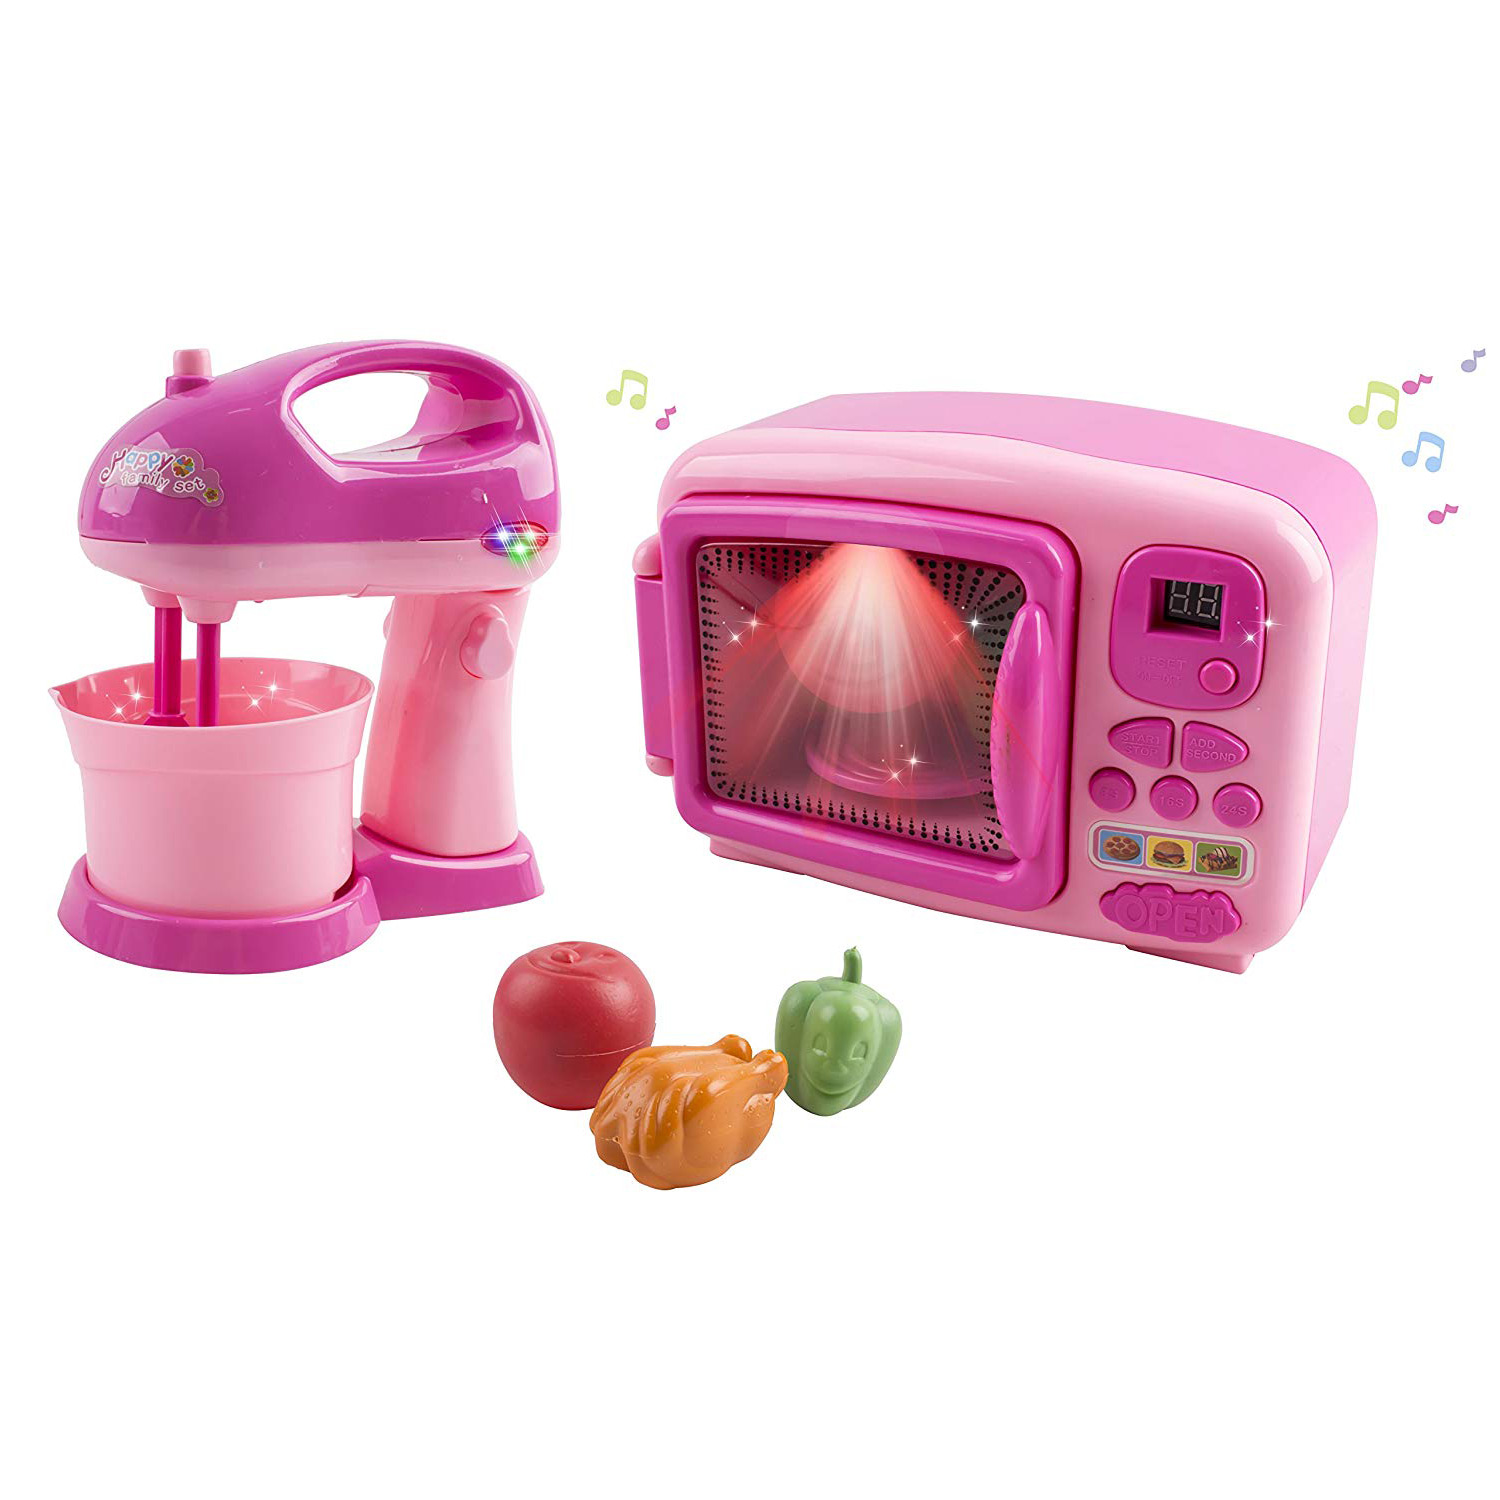 Toy Microwave and Mixing Blender Children's Kitchen Pretend Play